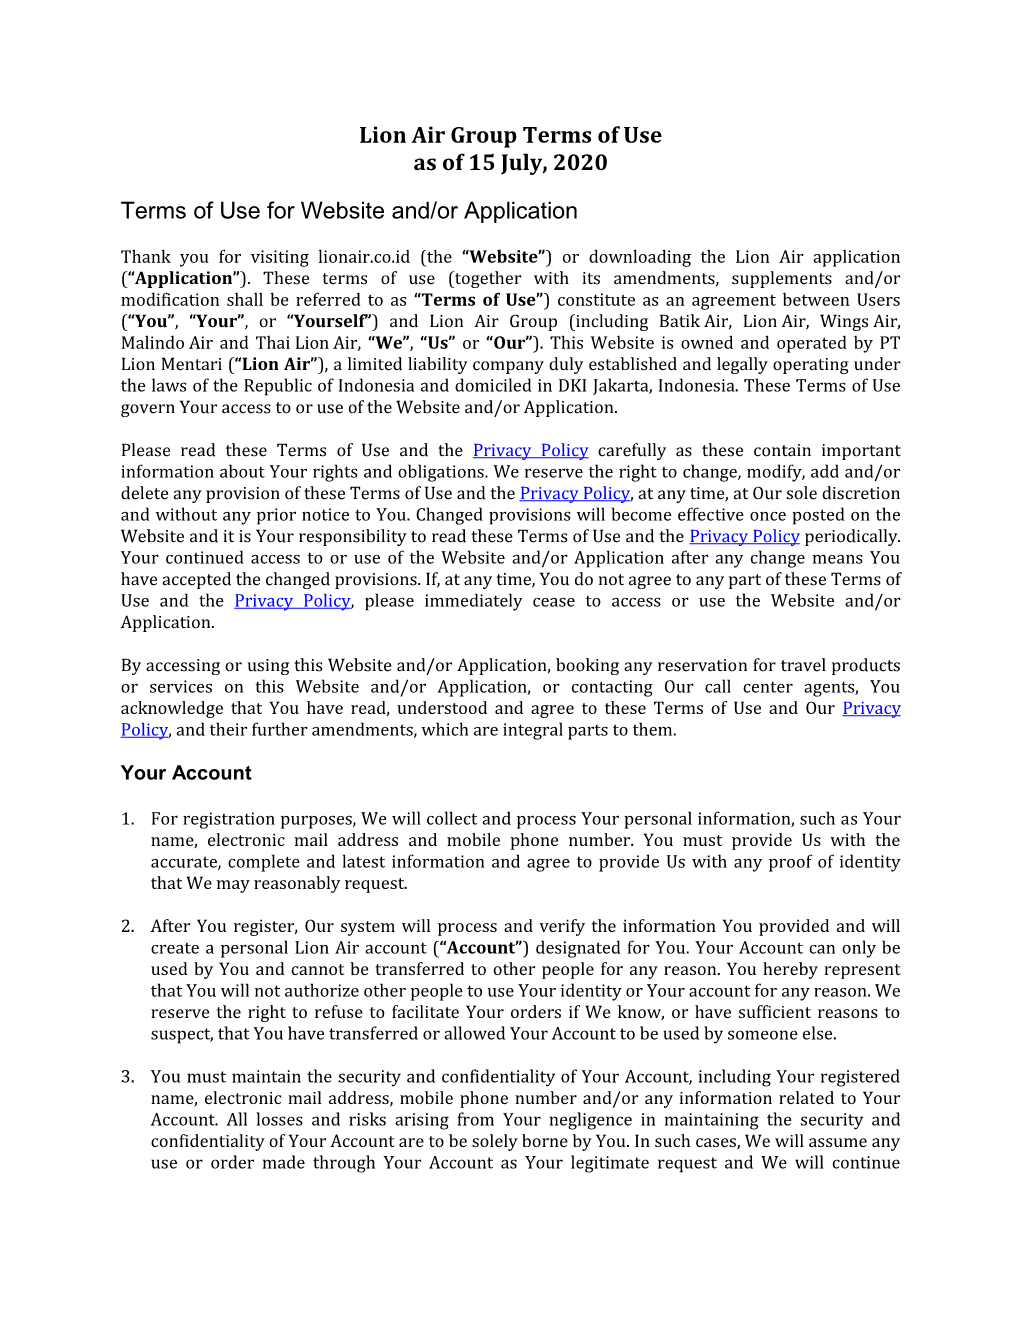 Lion Air Group Terms of Use As of 15 July, 2020 Terms of Use for Website And/Or Application